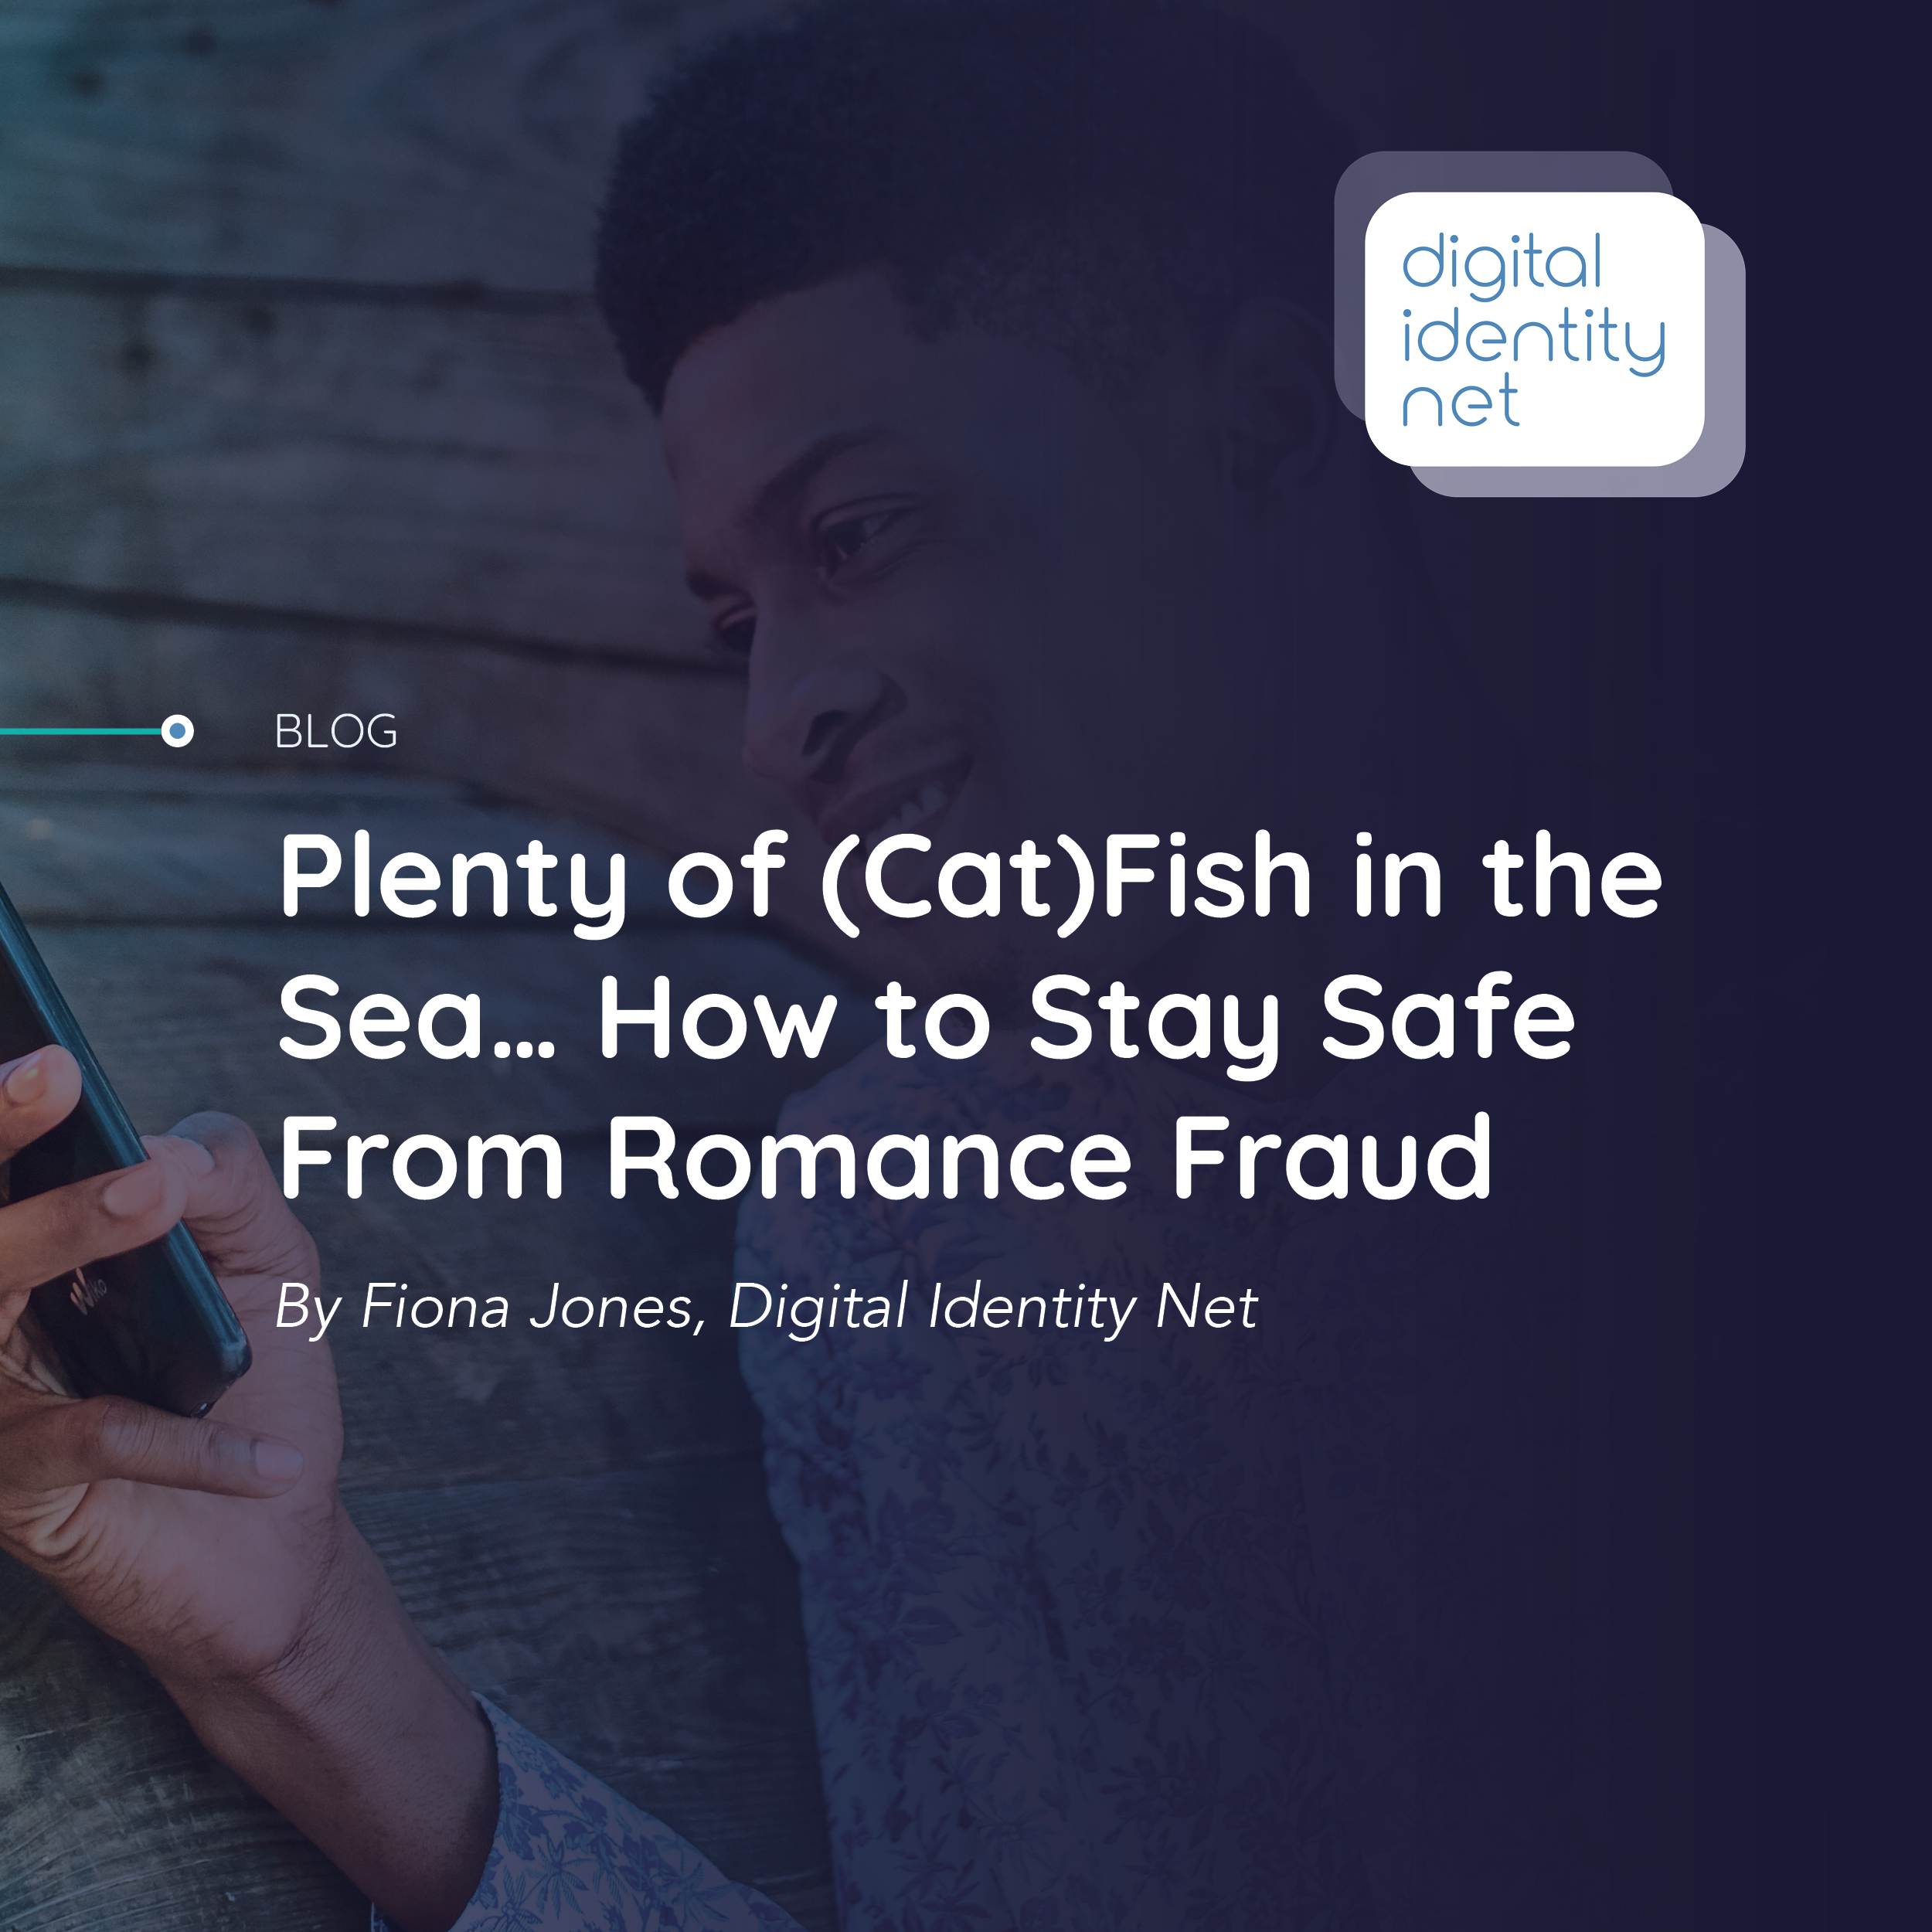 Plenty of CatFish in the sea... how to stay safe from romance fraud